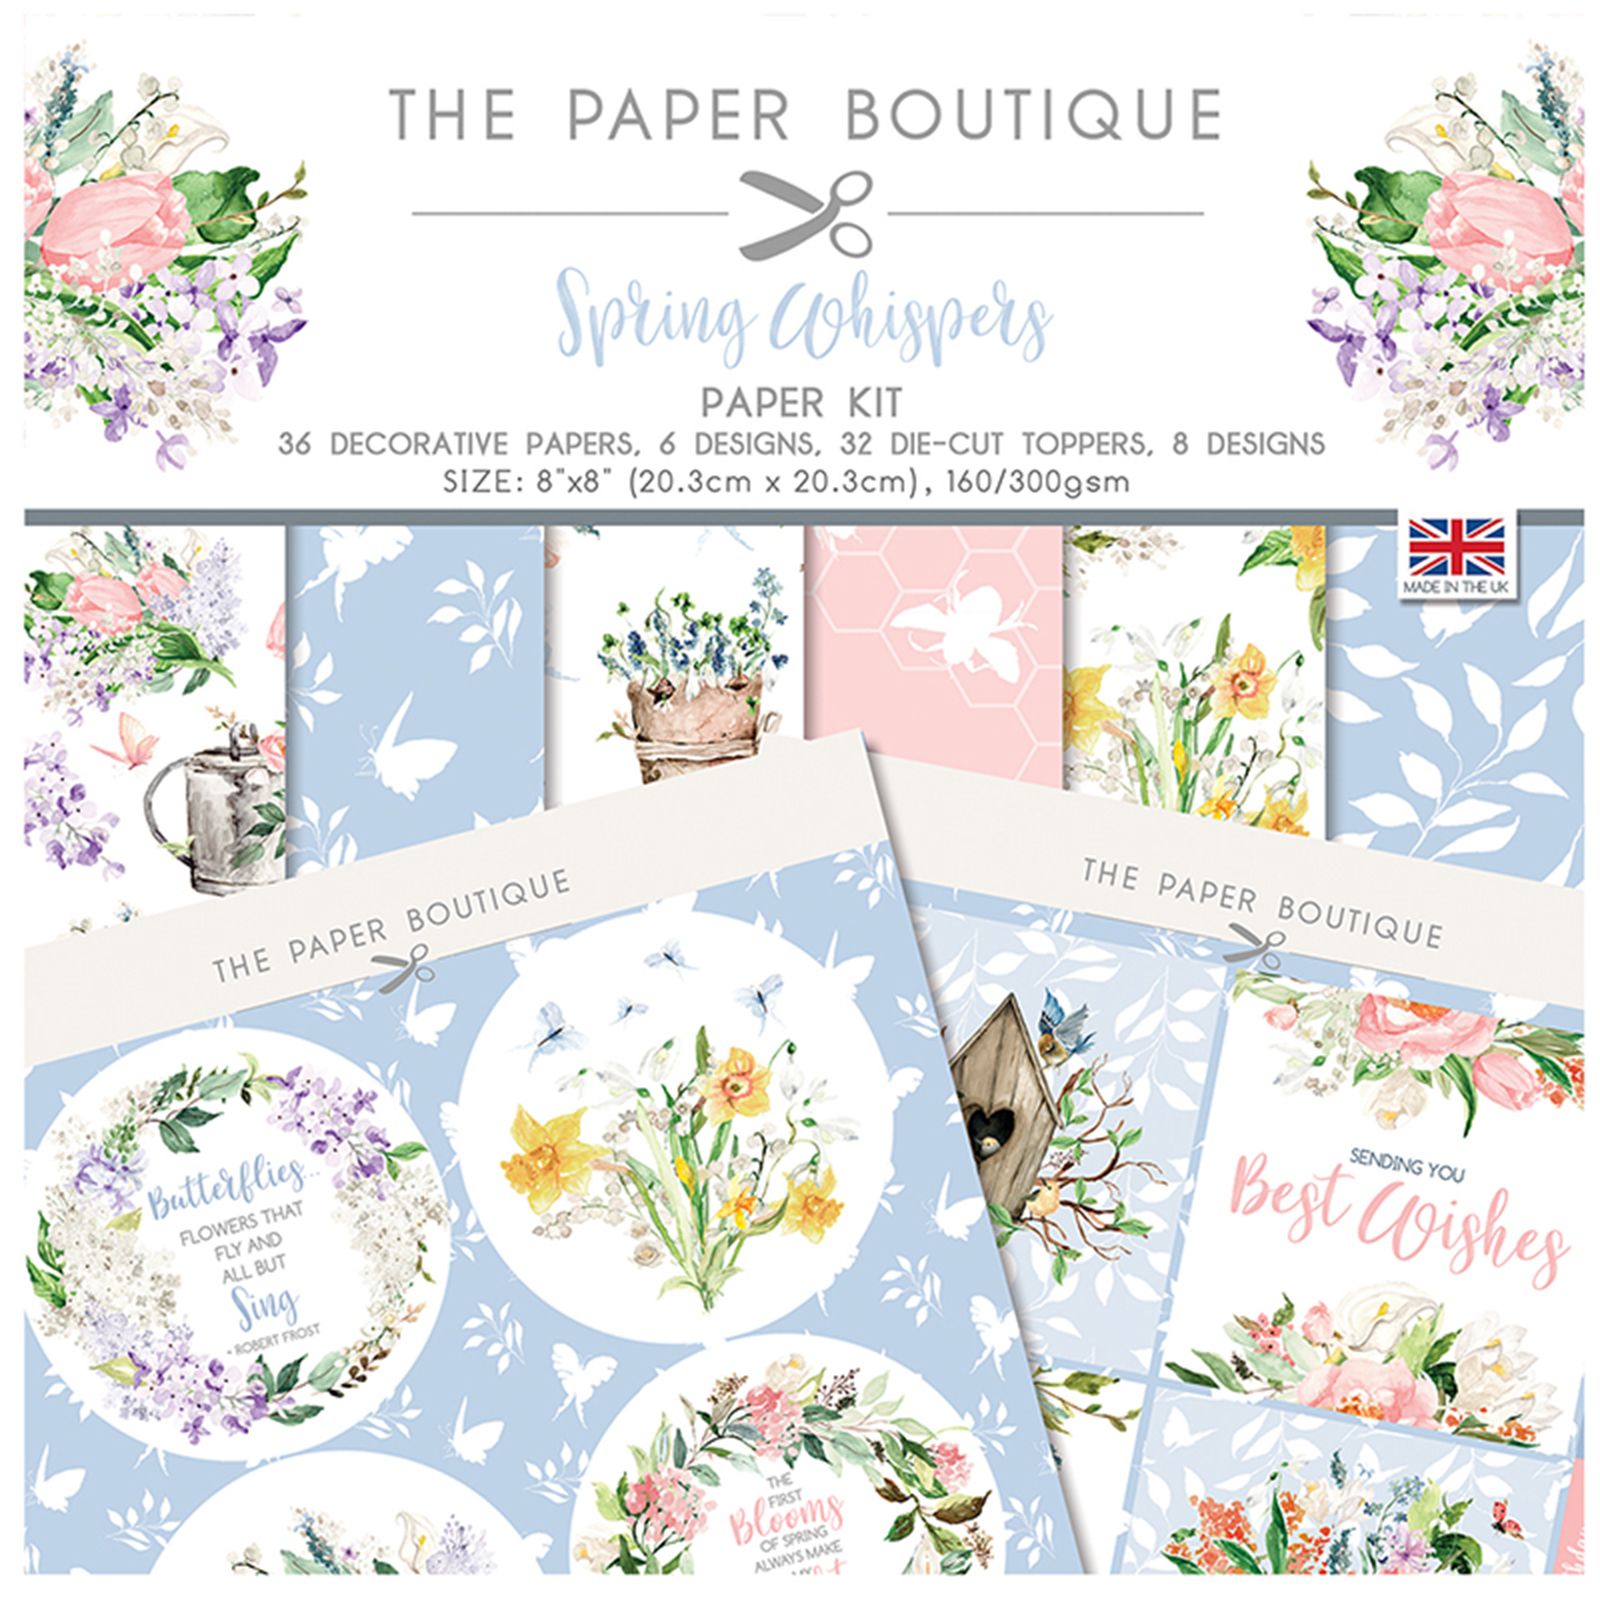 The Paper Boutique • Spring whispers paper kit